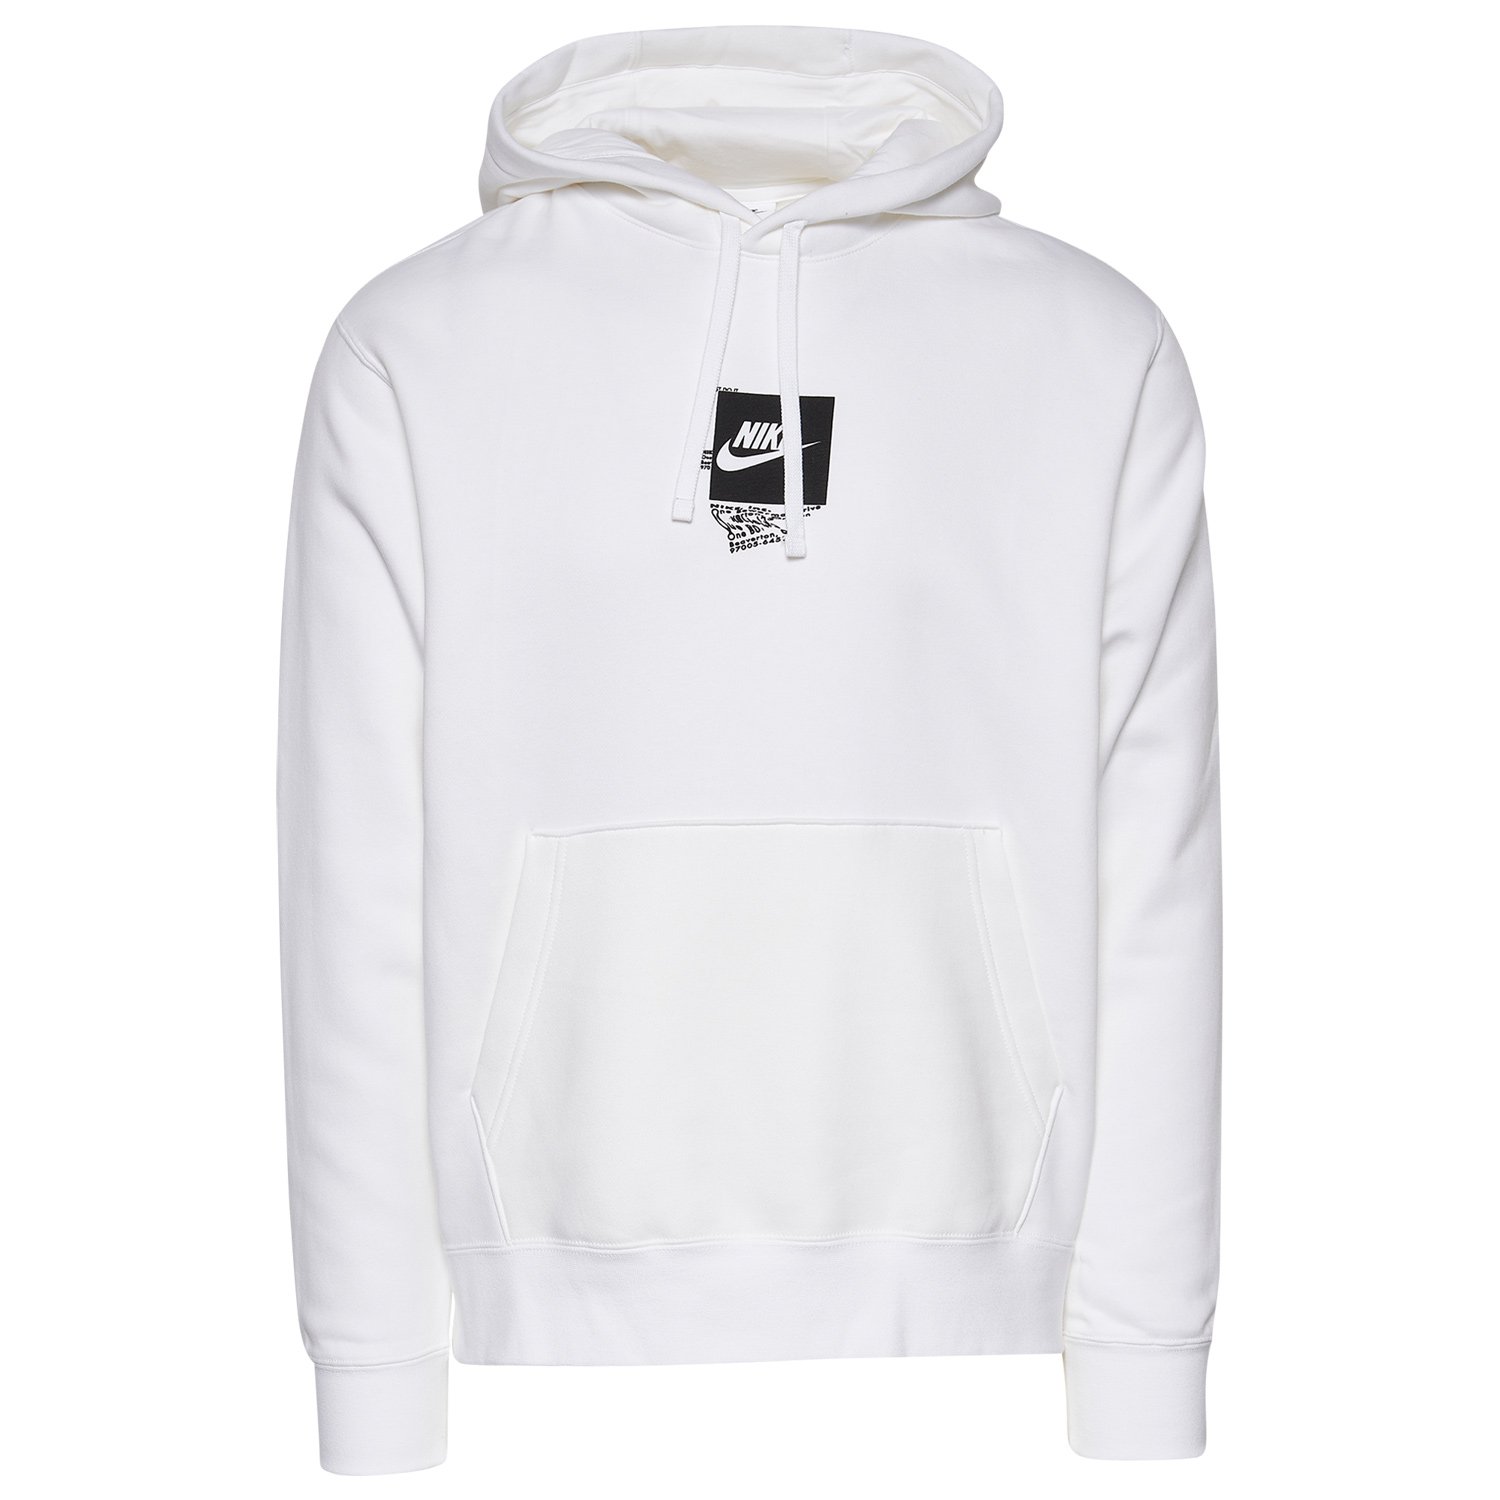 nike-alter-and-reveal-hoodie-white-black-1